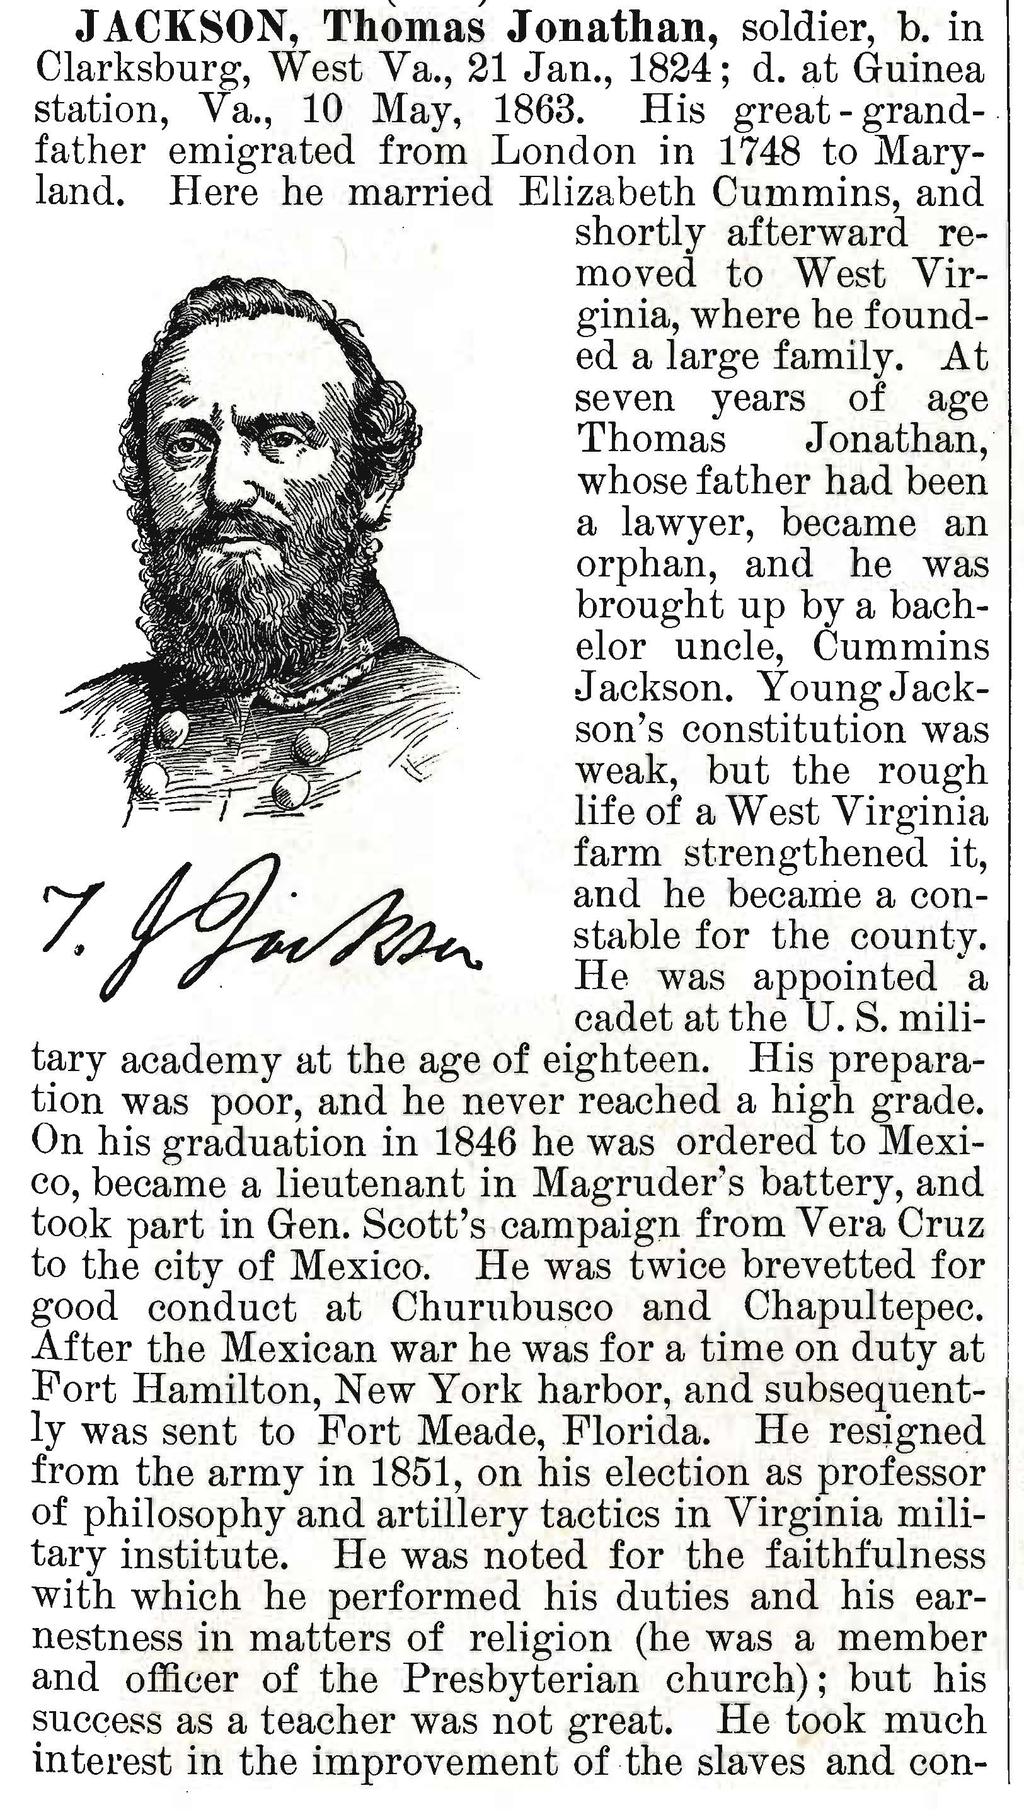 JACKSON, Thomas Jonathan, soldier, b. in Clarksburg, West Va., 21 Jan., 1824; d. at Guinea station, Va., 10 May, 1863. His great - grandfather emigrated from London in 1748 to Maryland.